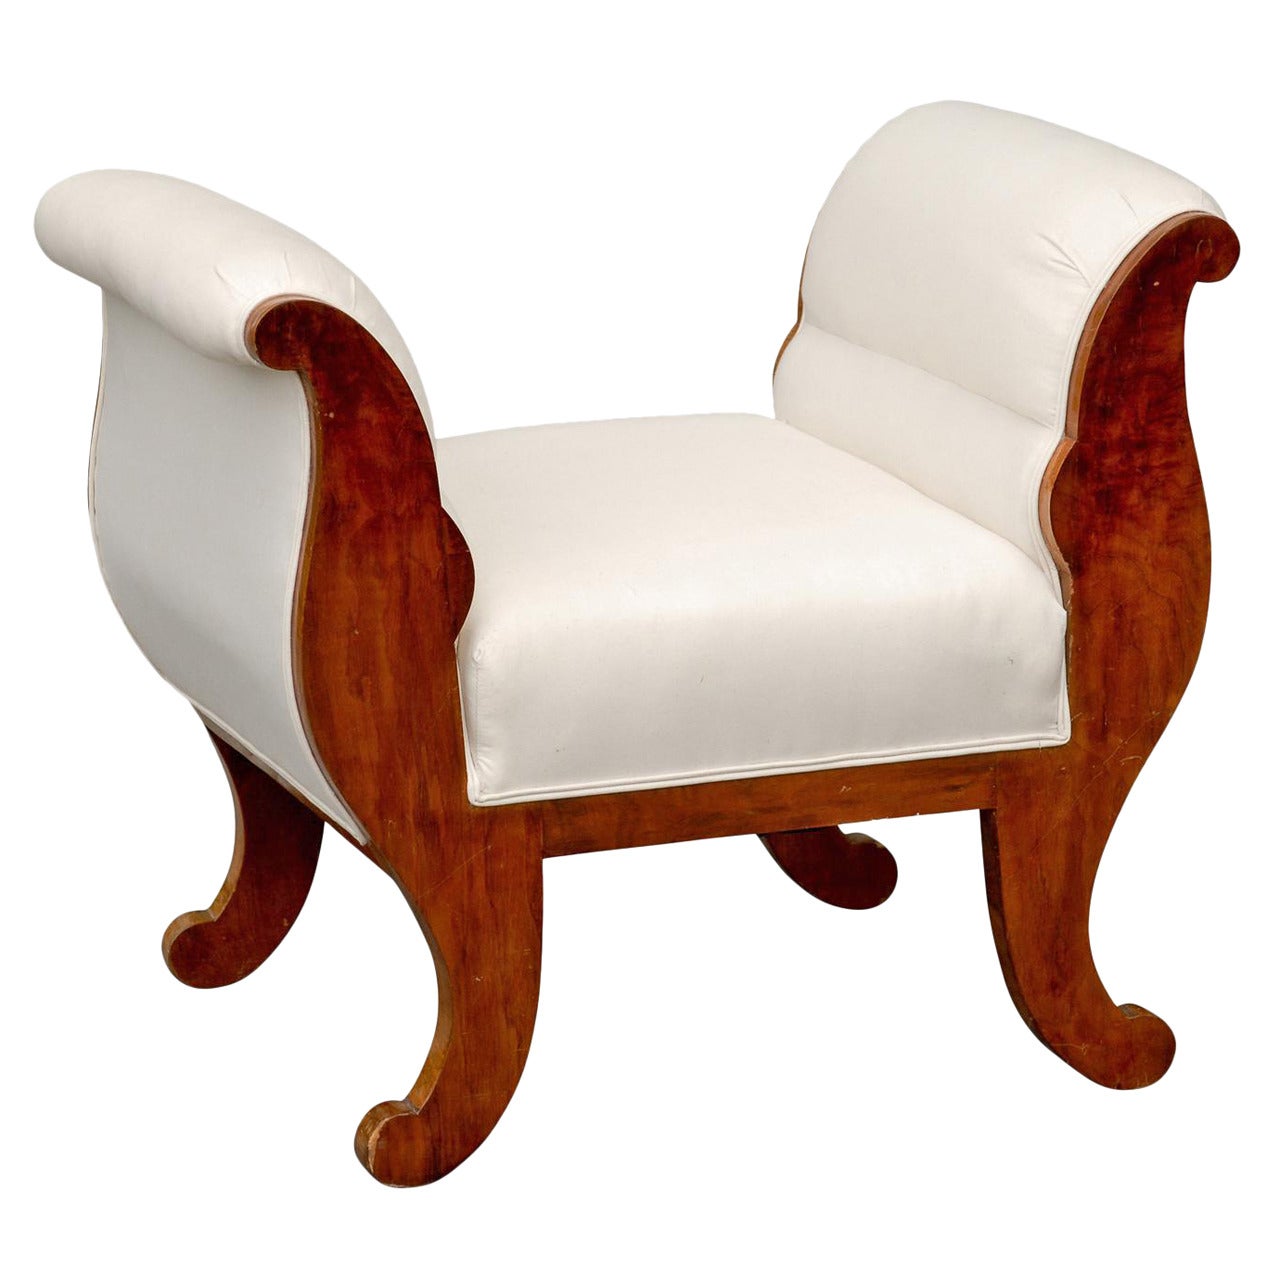 Austrian 1850s Biedermeier Upholstered Stool with Out-Scrolled Arms and Legs For Sale